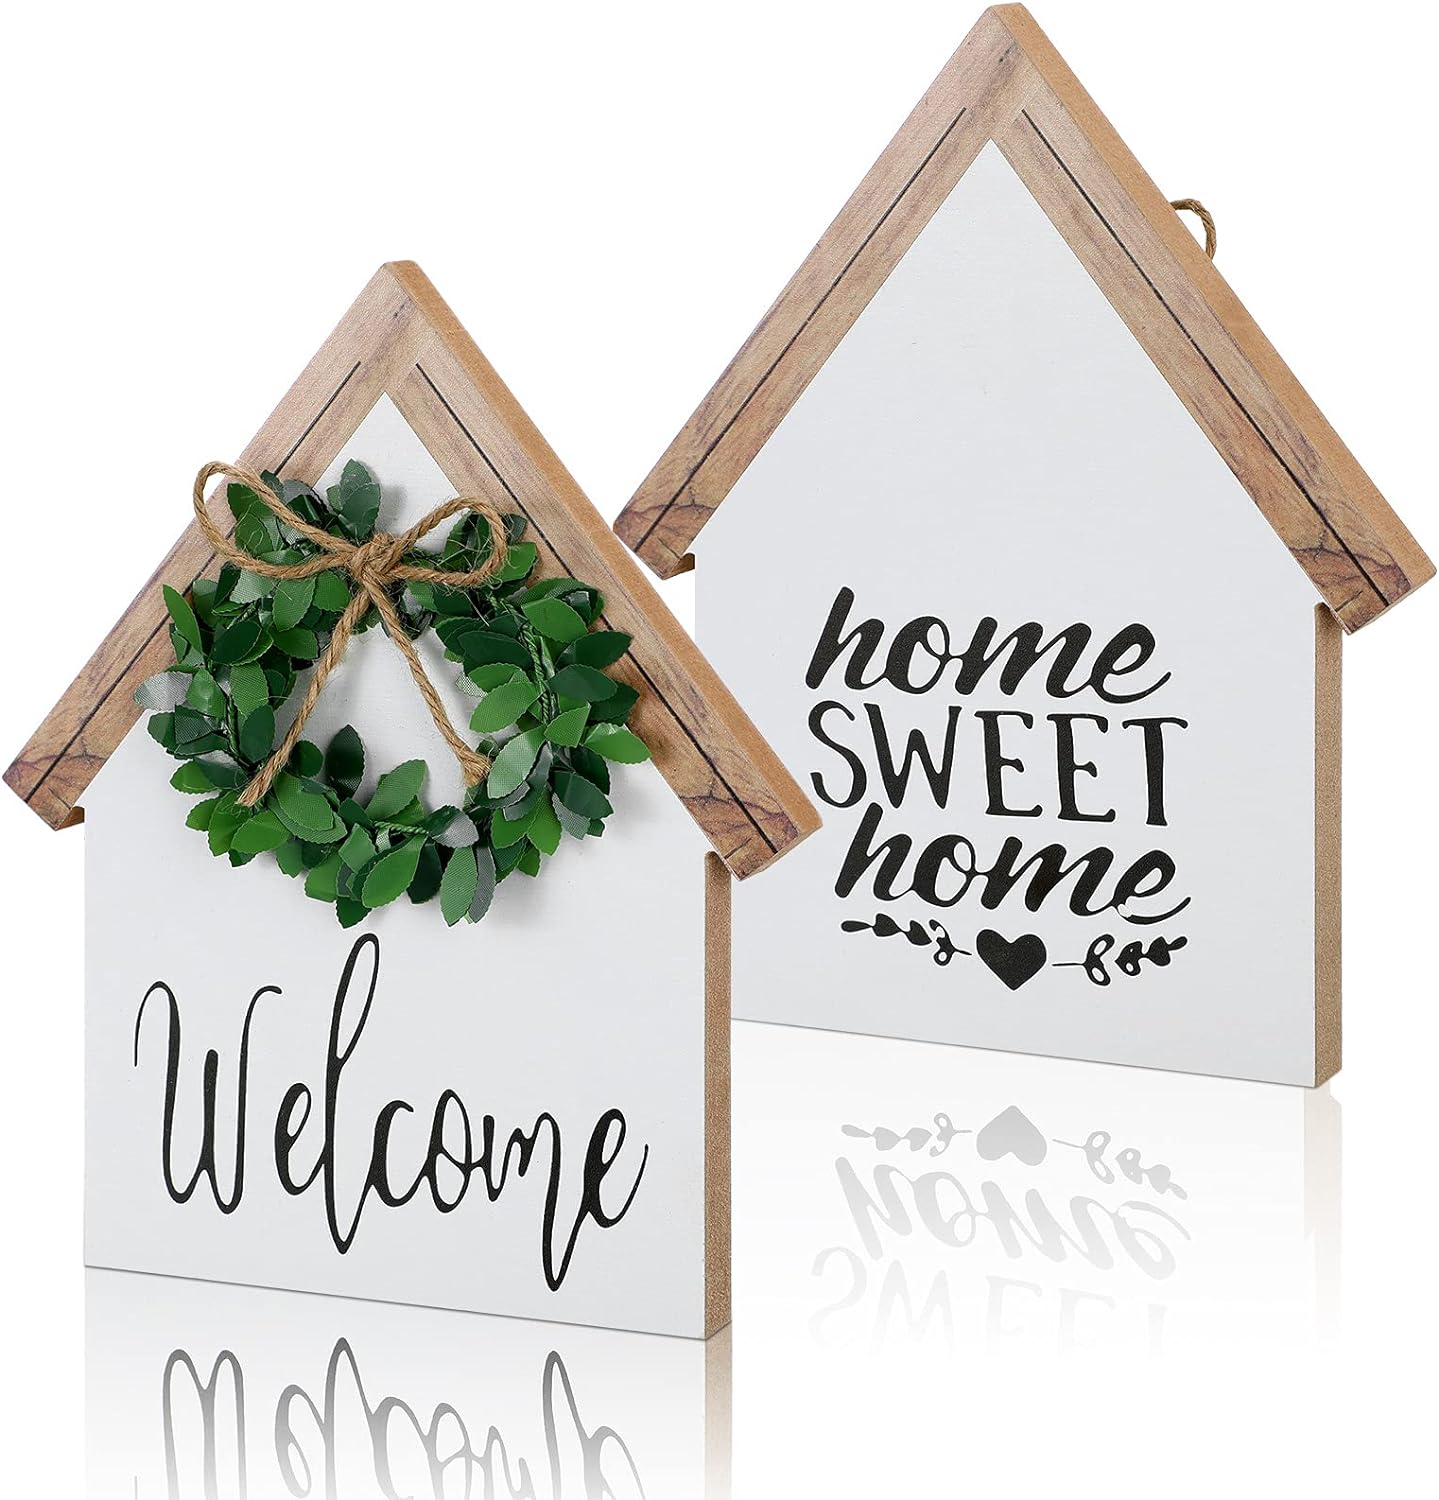 Wood Sign Home Sweet Home Tiered Tray Decor Farmhouse Home Clearance Living Room Decor